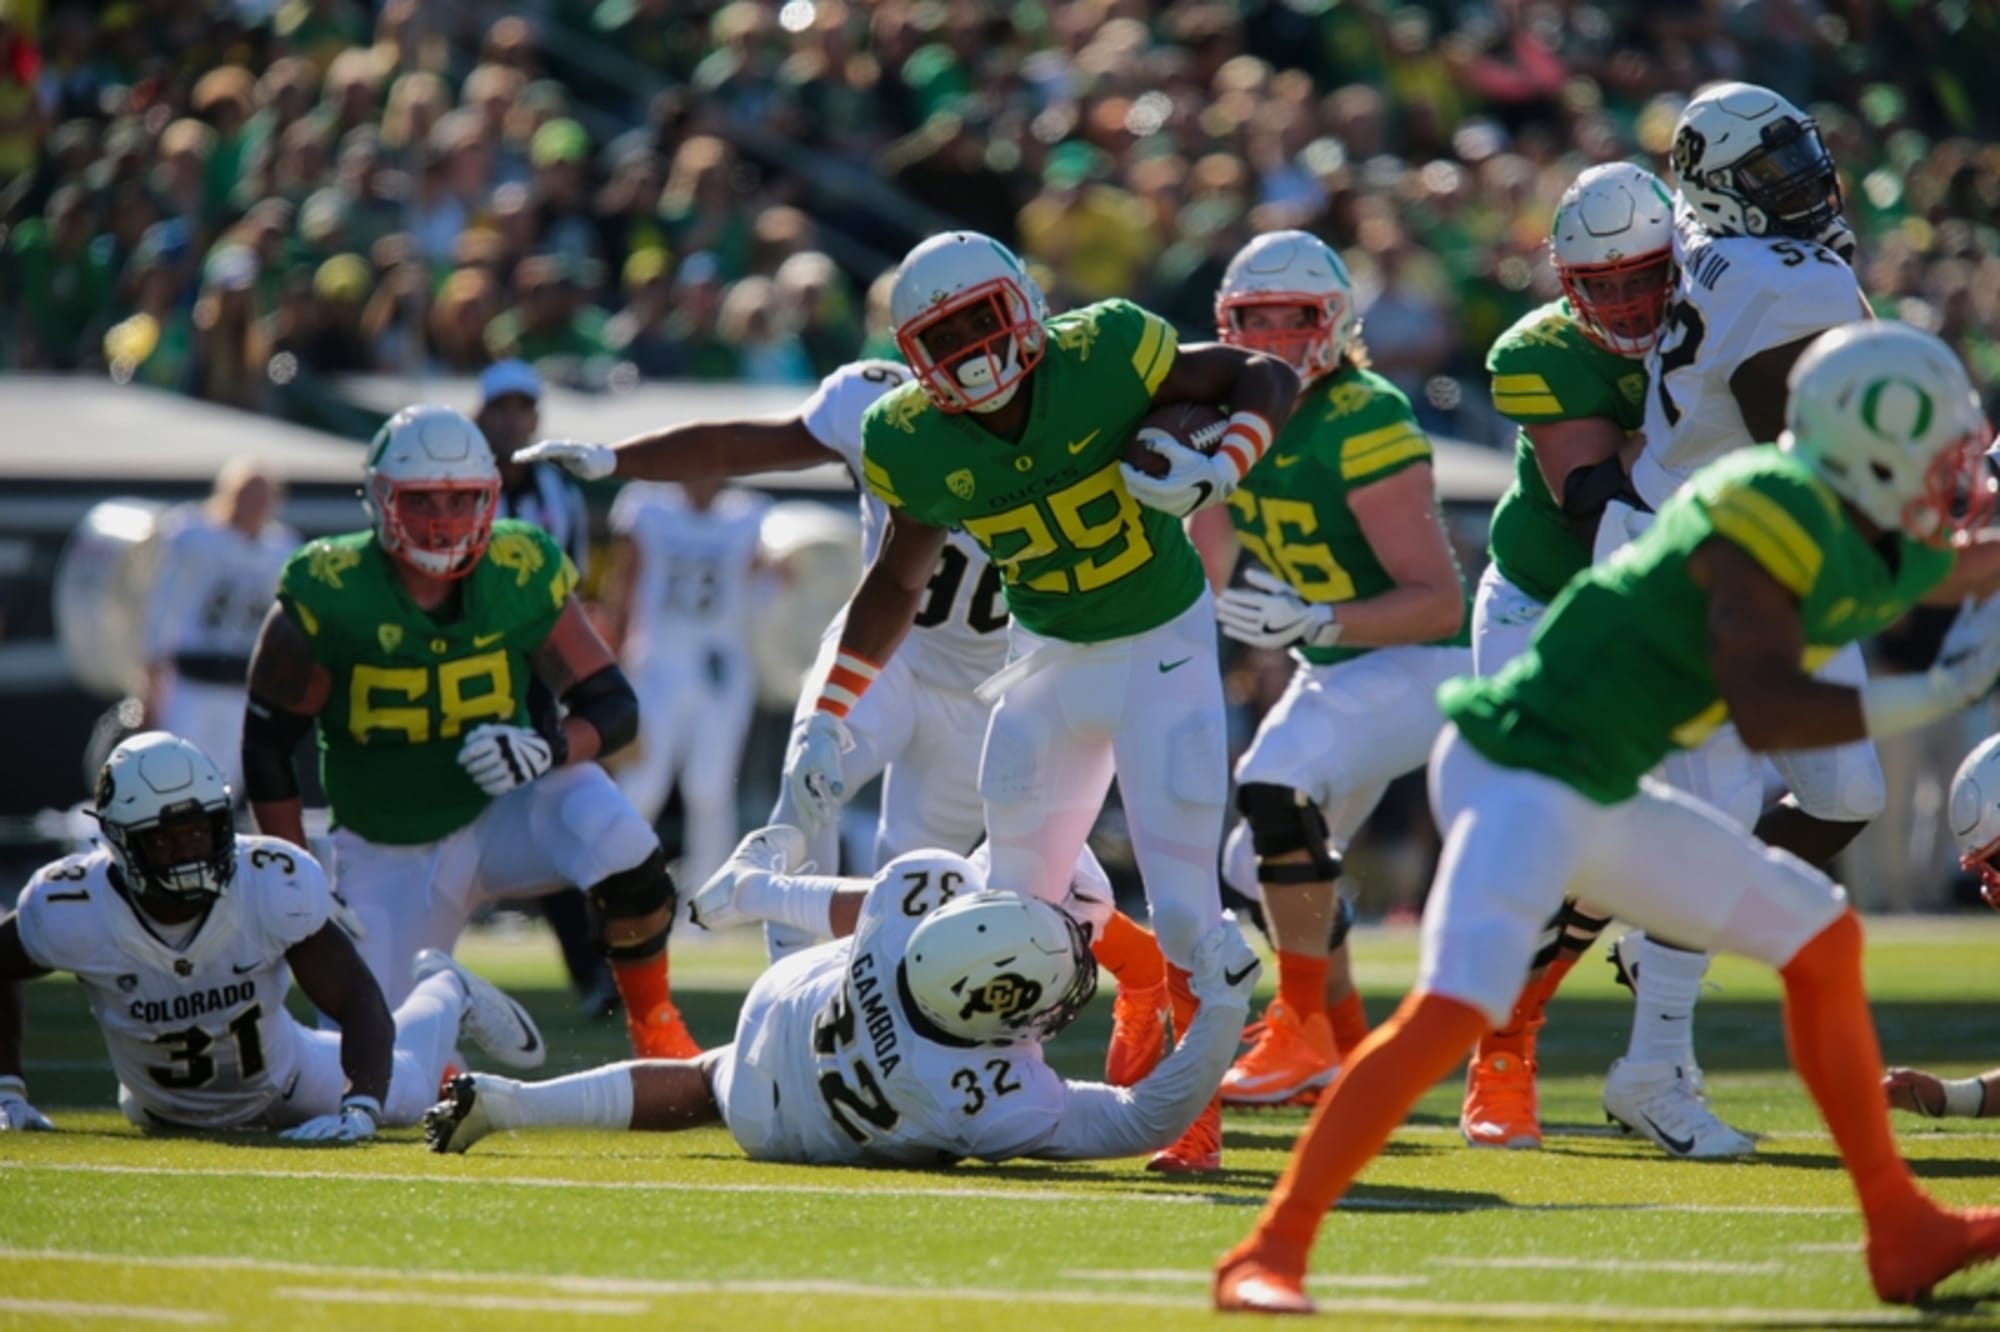 Oregon's newest creative football uniforms make the players look